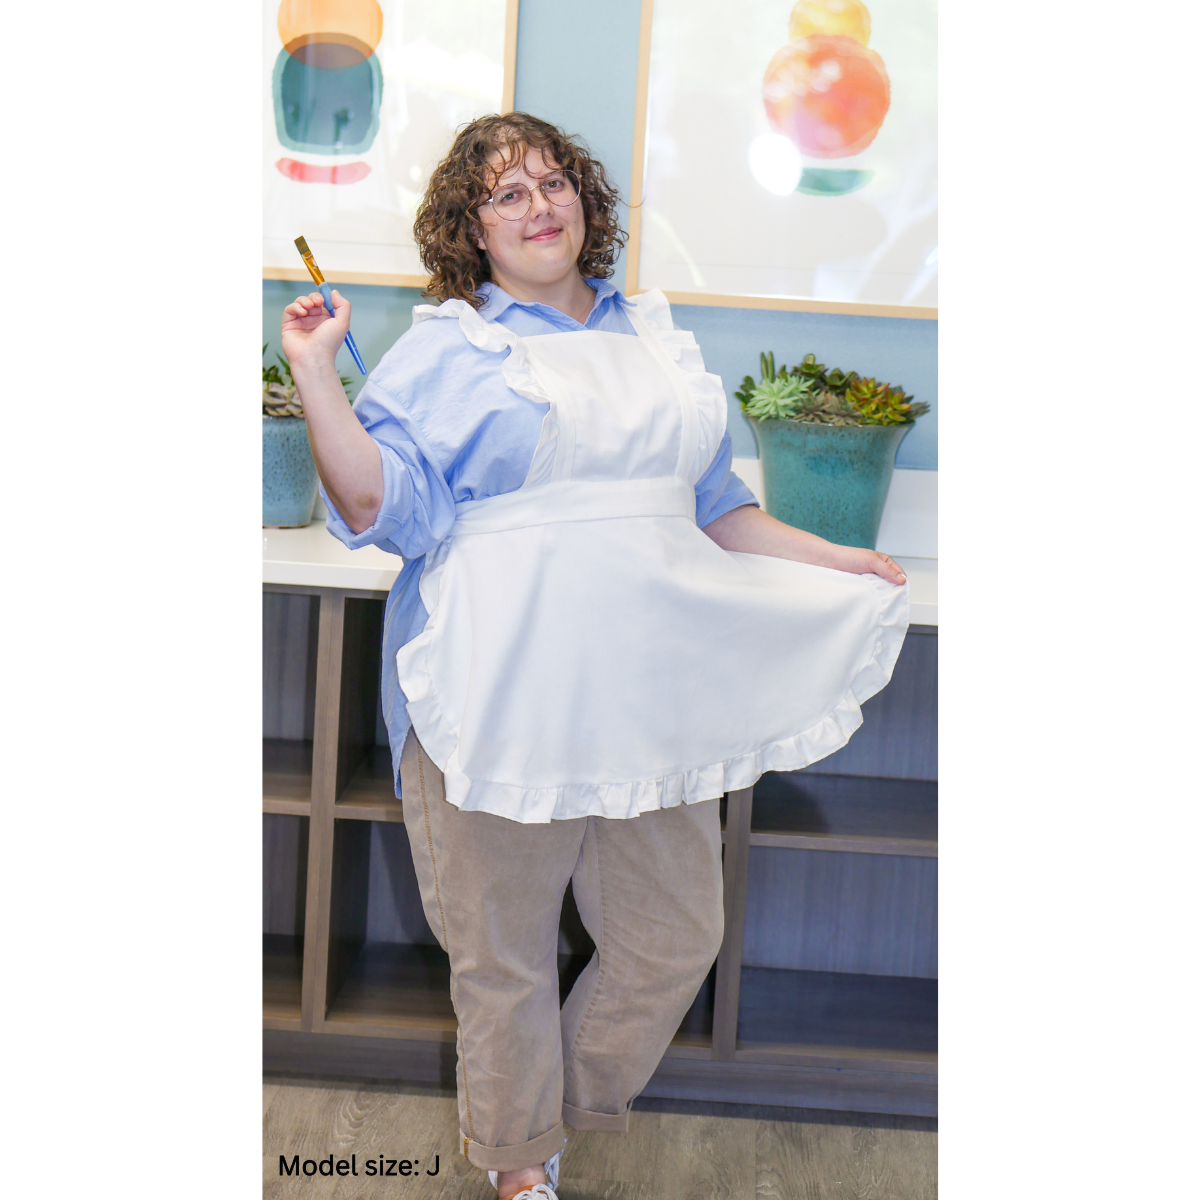 A female plus-size model posing while wearing a solid white apron. The model is holding the bottom hem of the apron with her left hand and a paintbrush in her right hand. The model is size J.